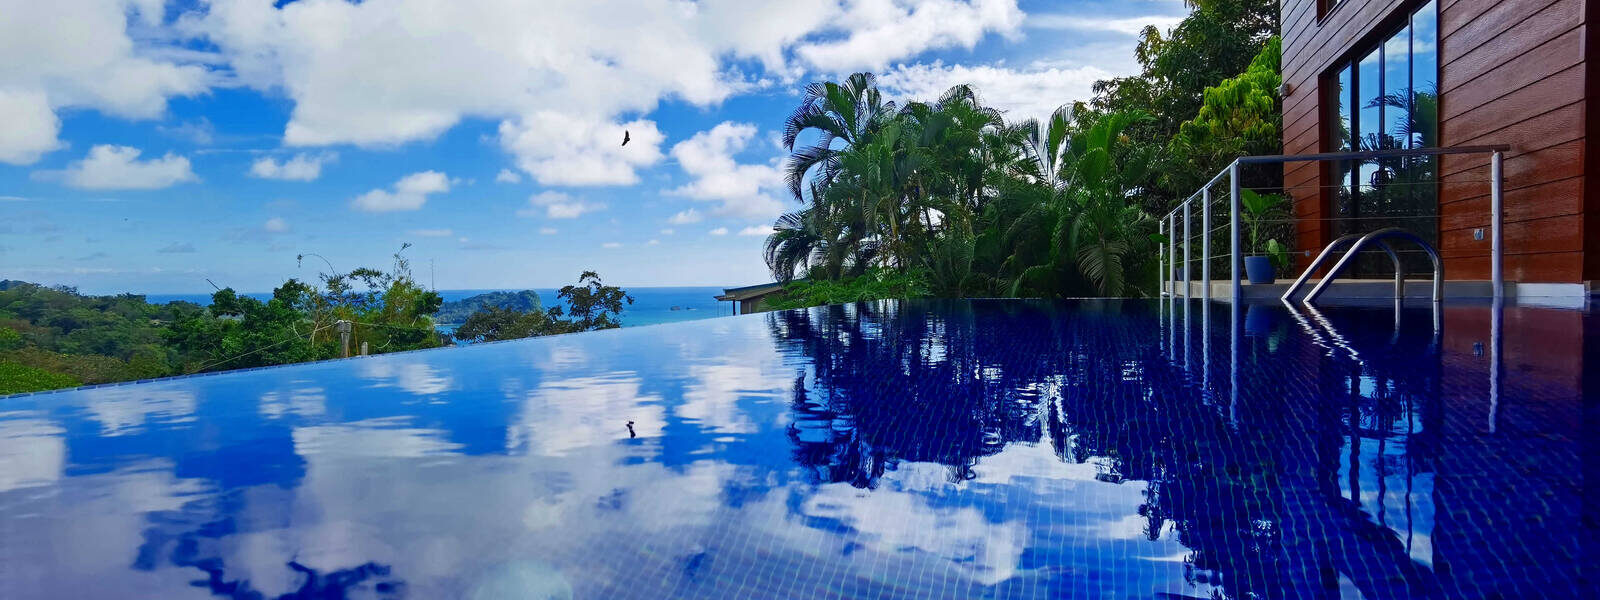 The gorgeous inviting crystal-clear infinity pool is the highlight of this stunning Manuel Antonio villa.